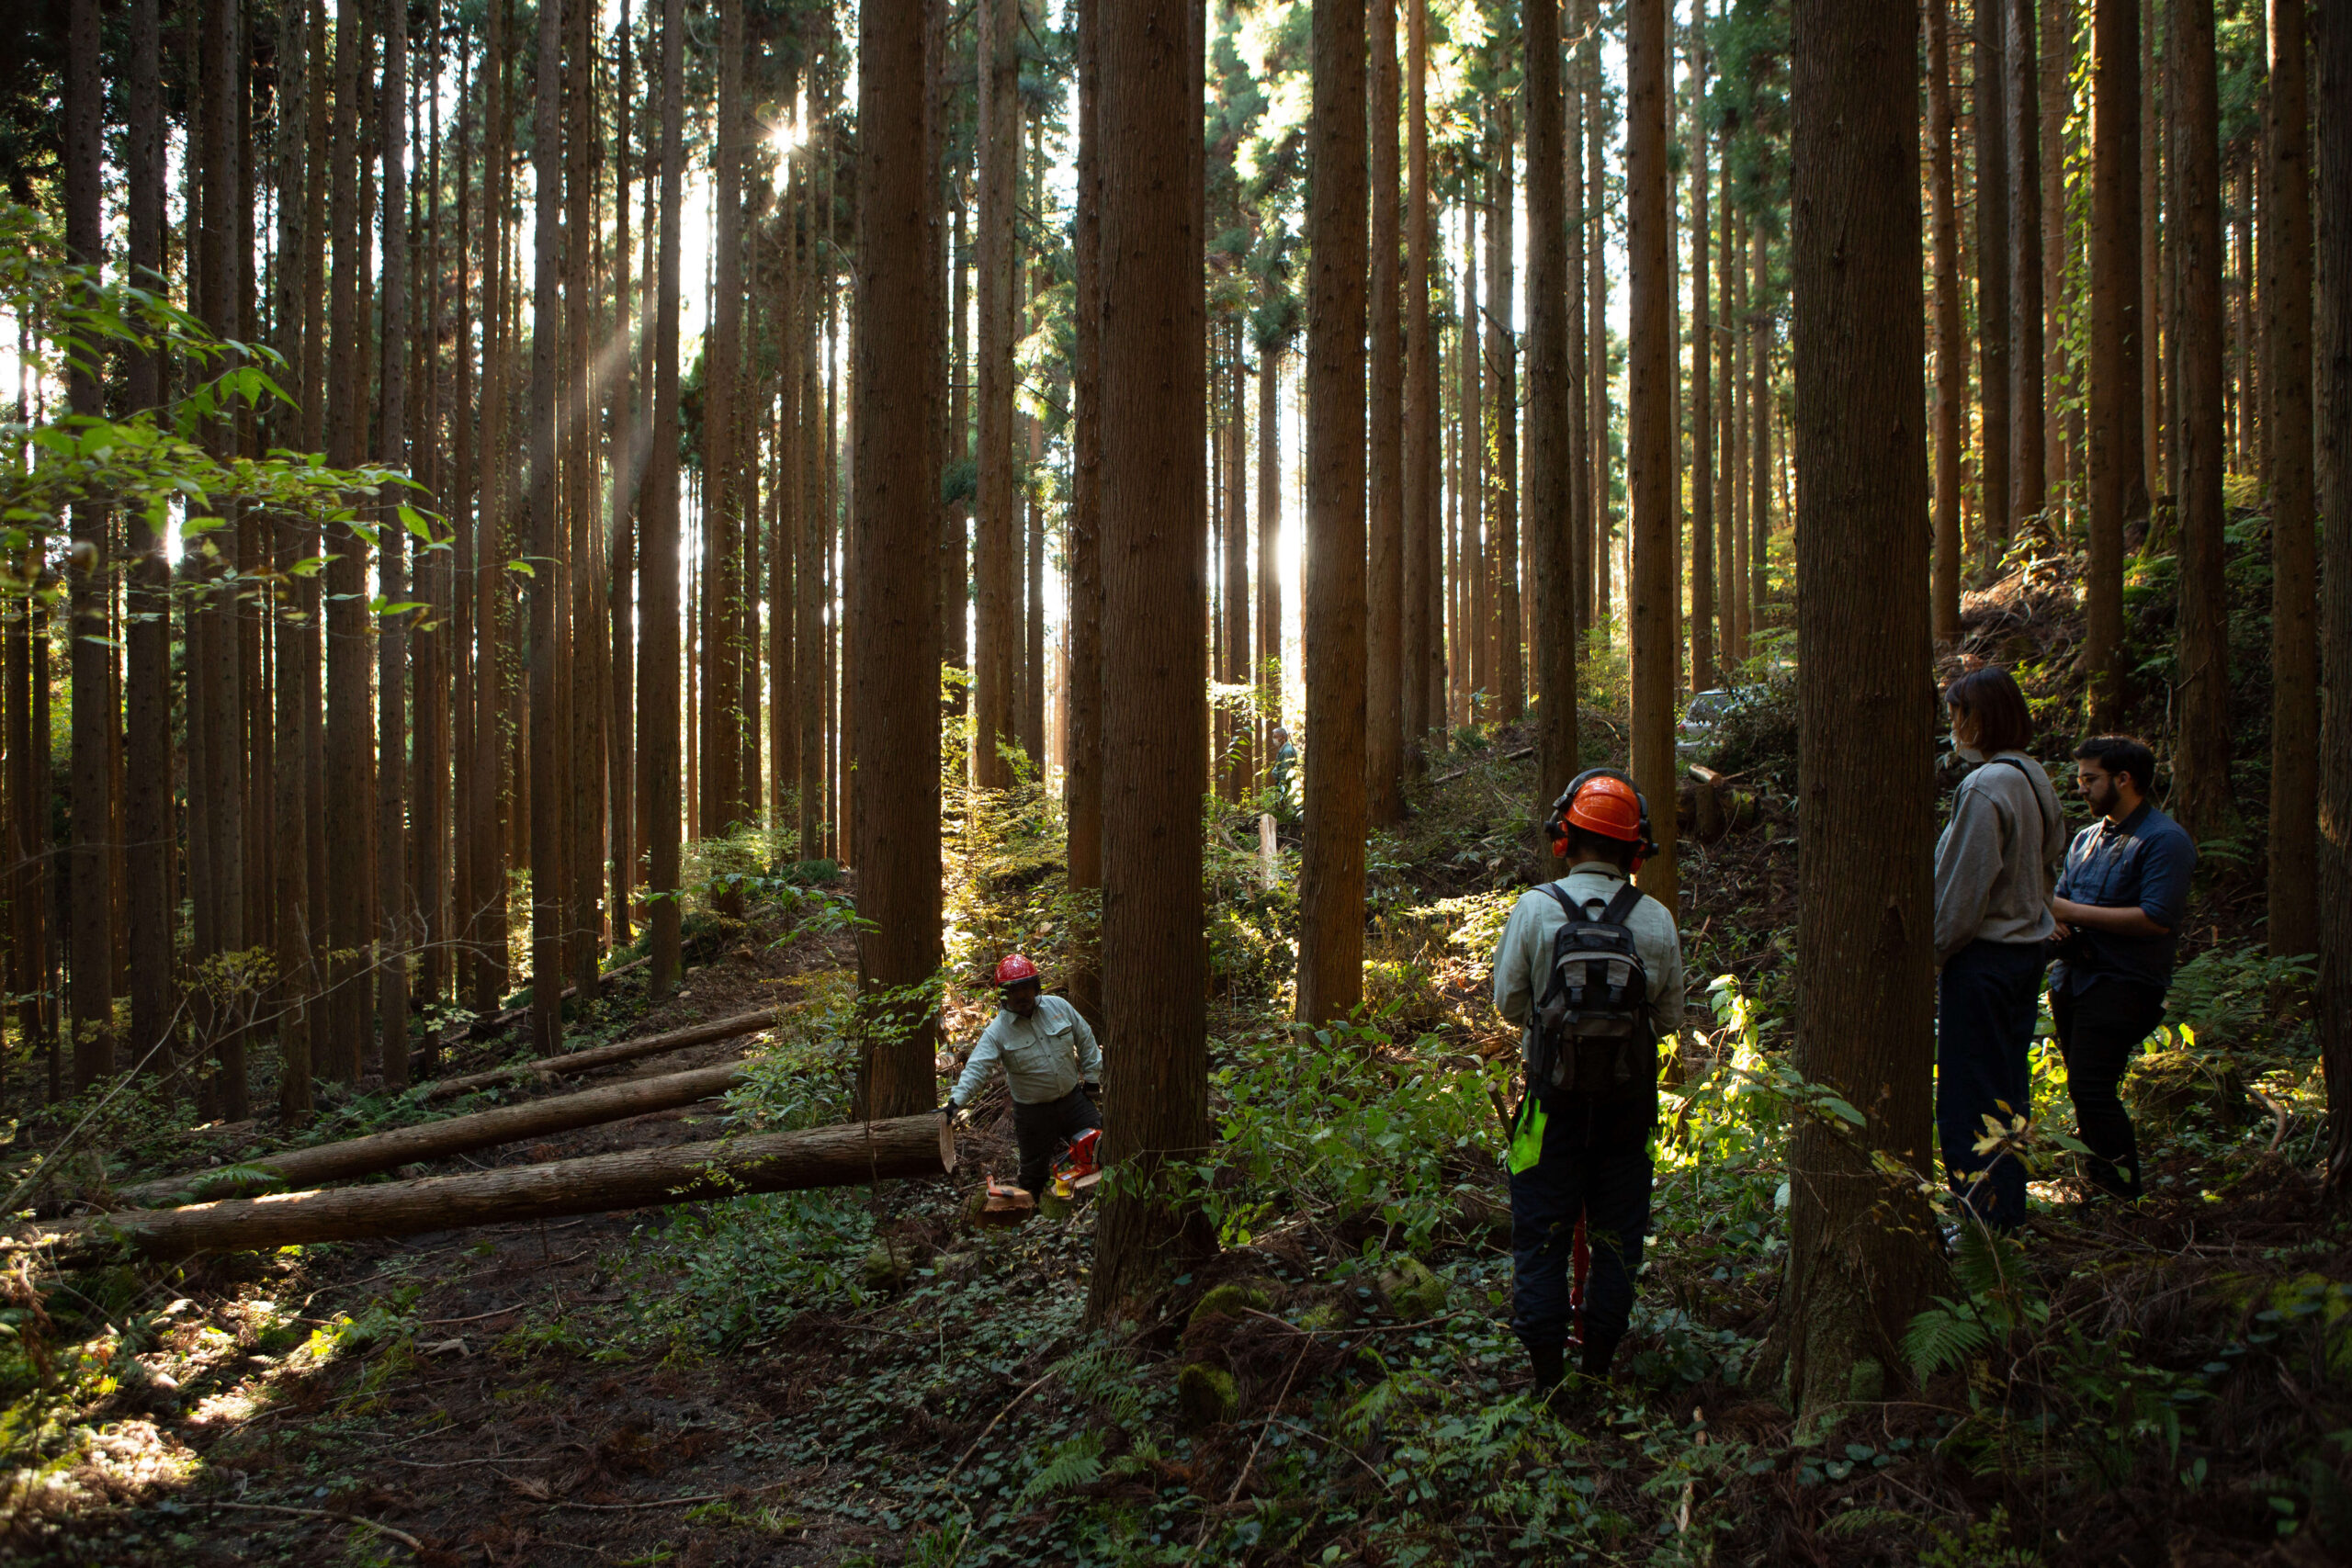 Japan's History of Sustainable Forestry Practices